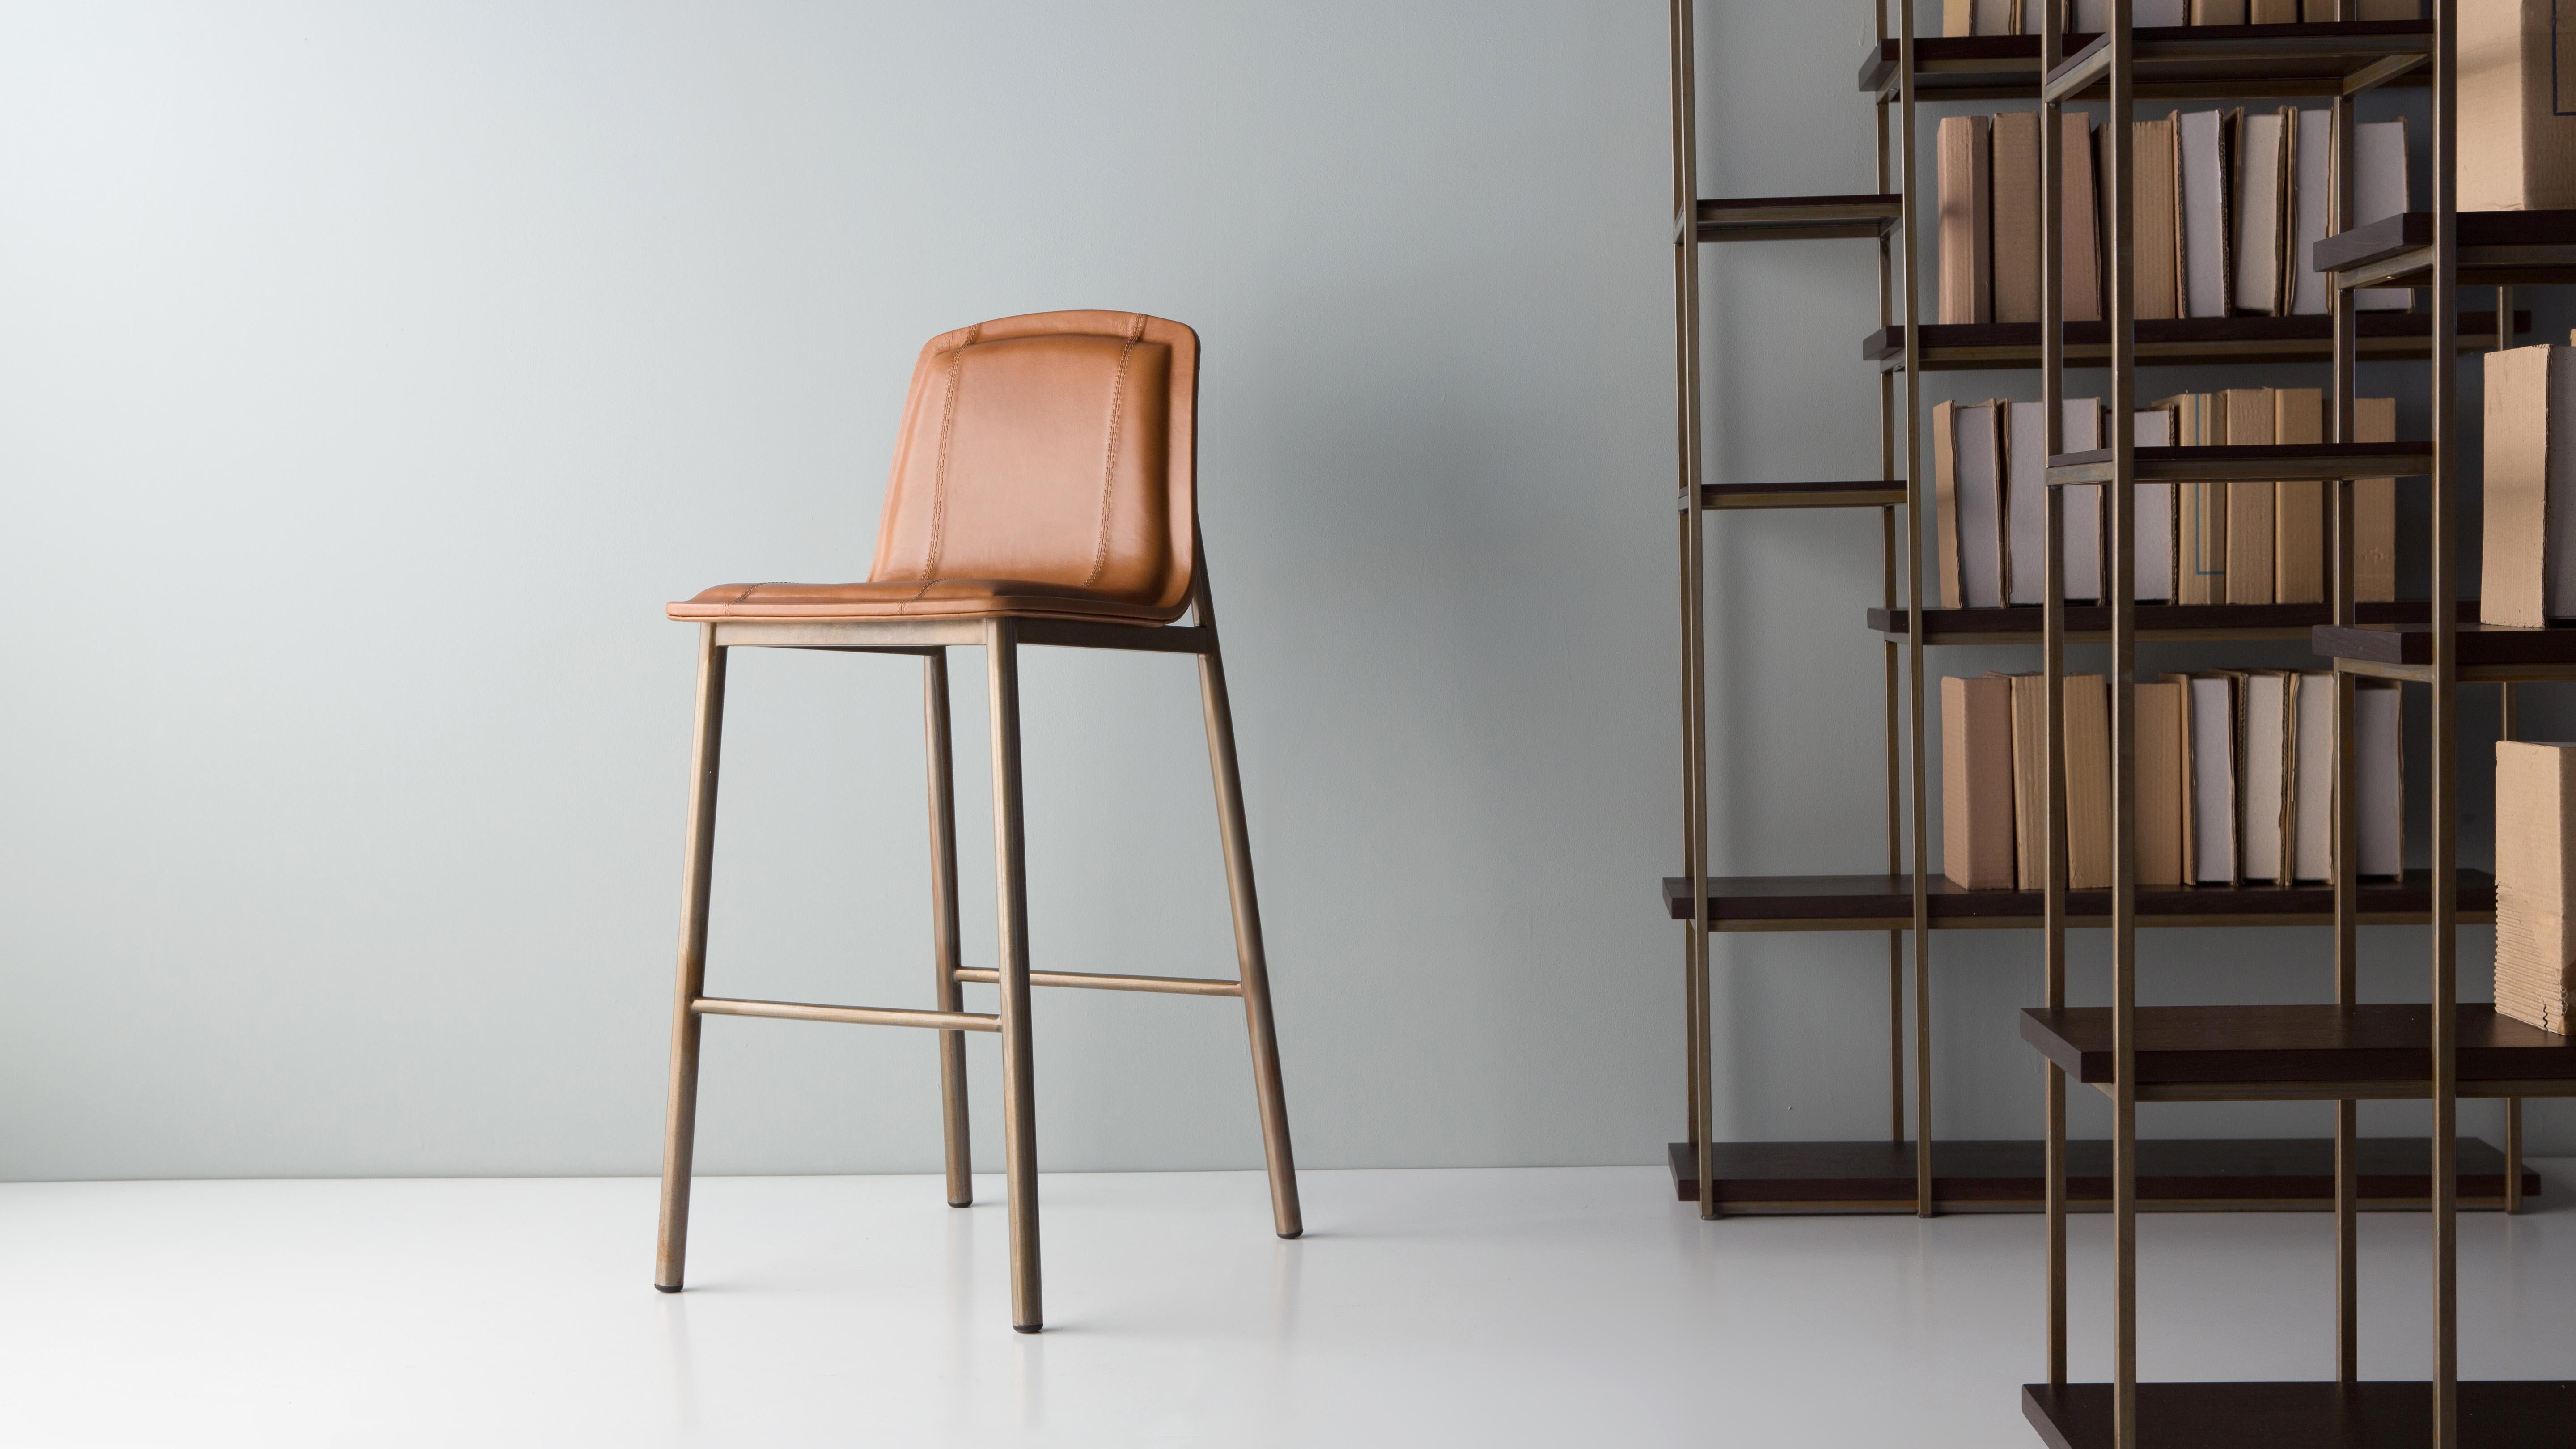 High Moi Bar Stool by Doimo Brasil
Dimensions: W 51 x D 58 x H 109 cm 
Materials: Veneer, Natural Leather.

Also available in W 51 x D 58 x H 93 cm, Seat Height: 60 cm. 

With the intention of providing good taste and personality, Doimo deciphers